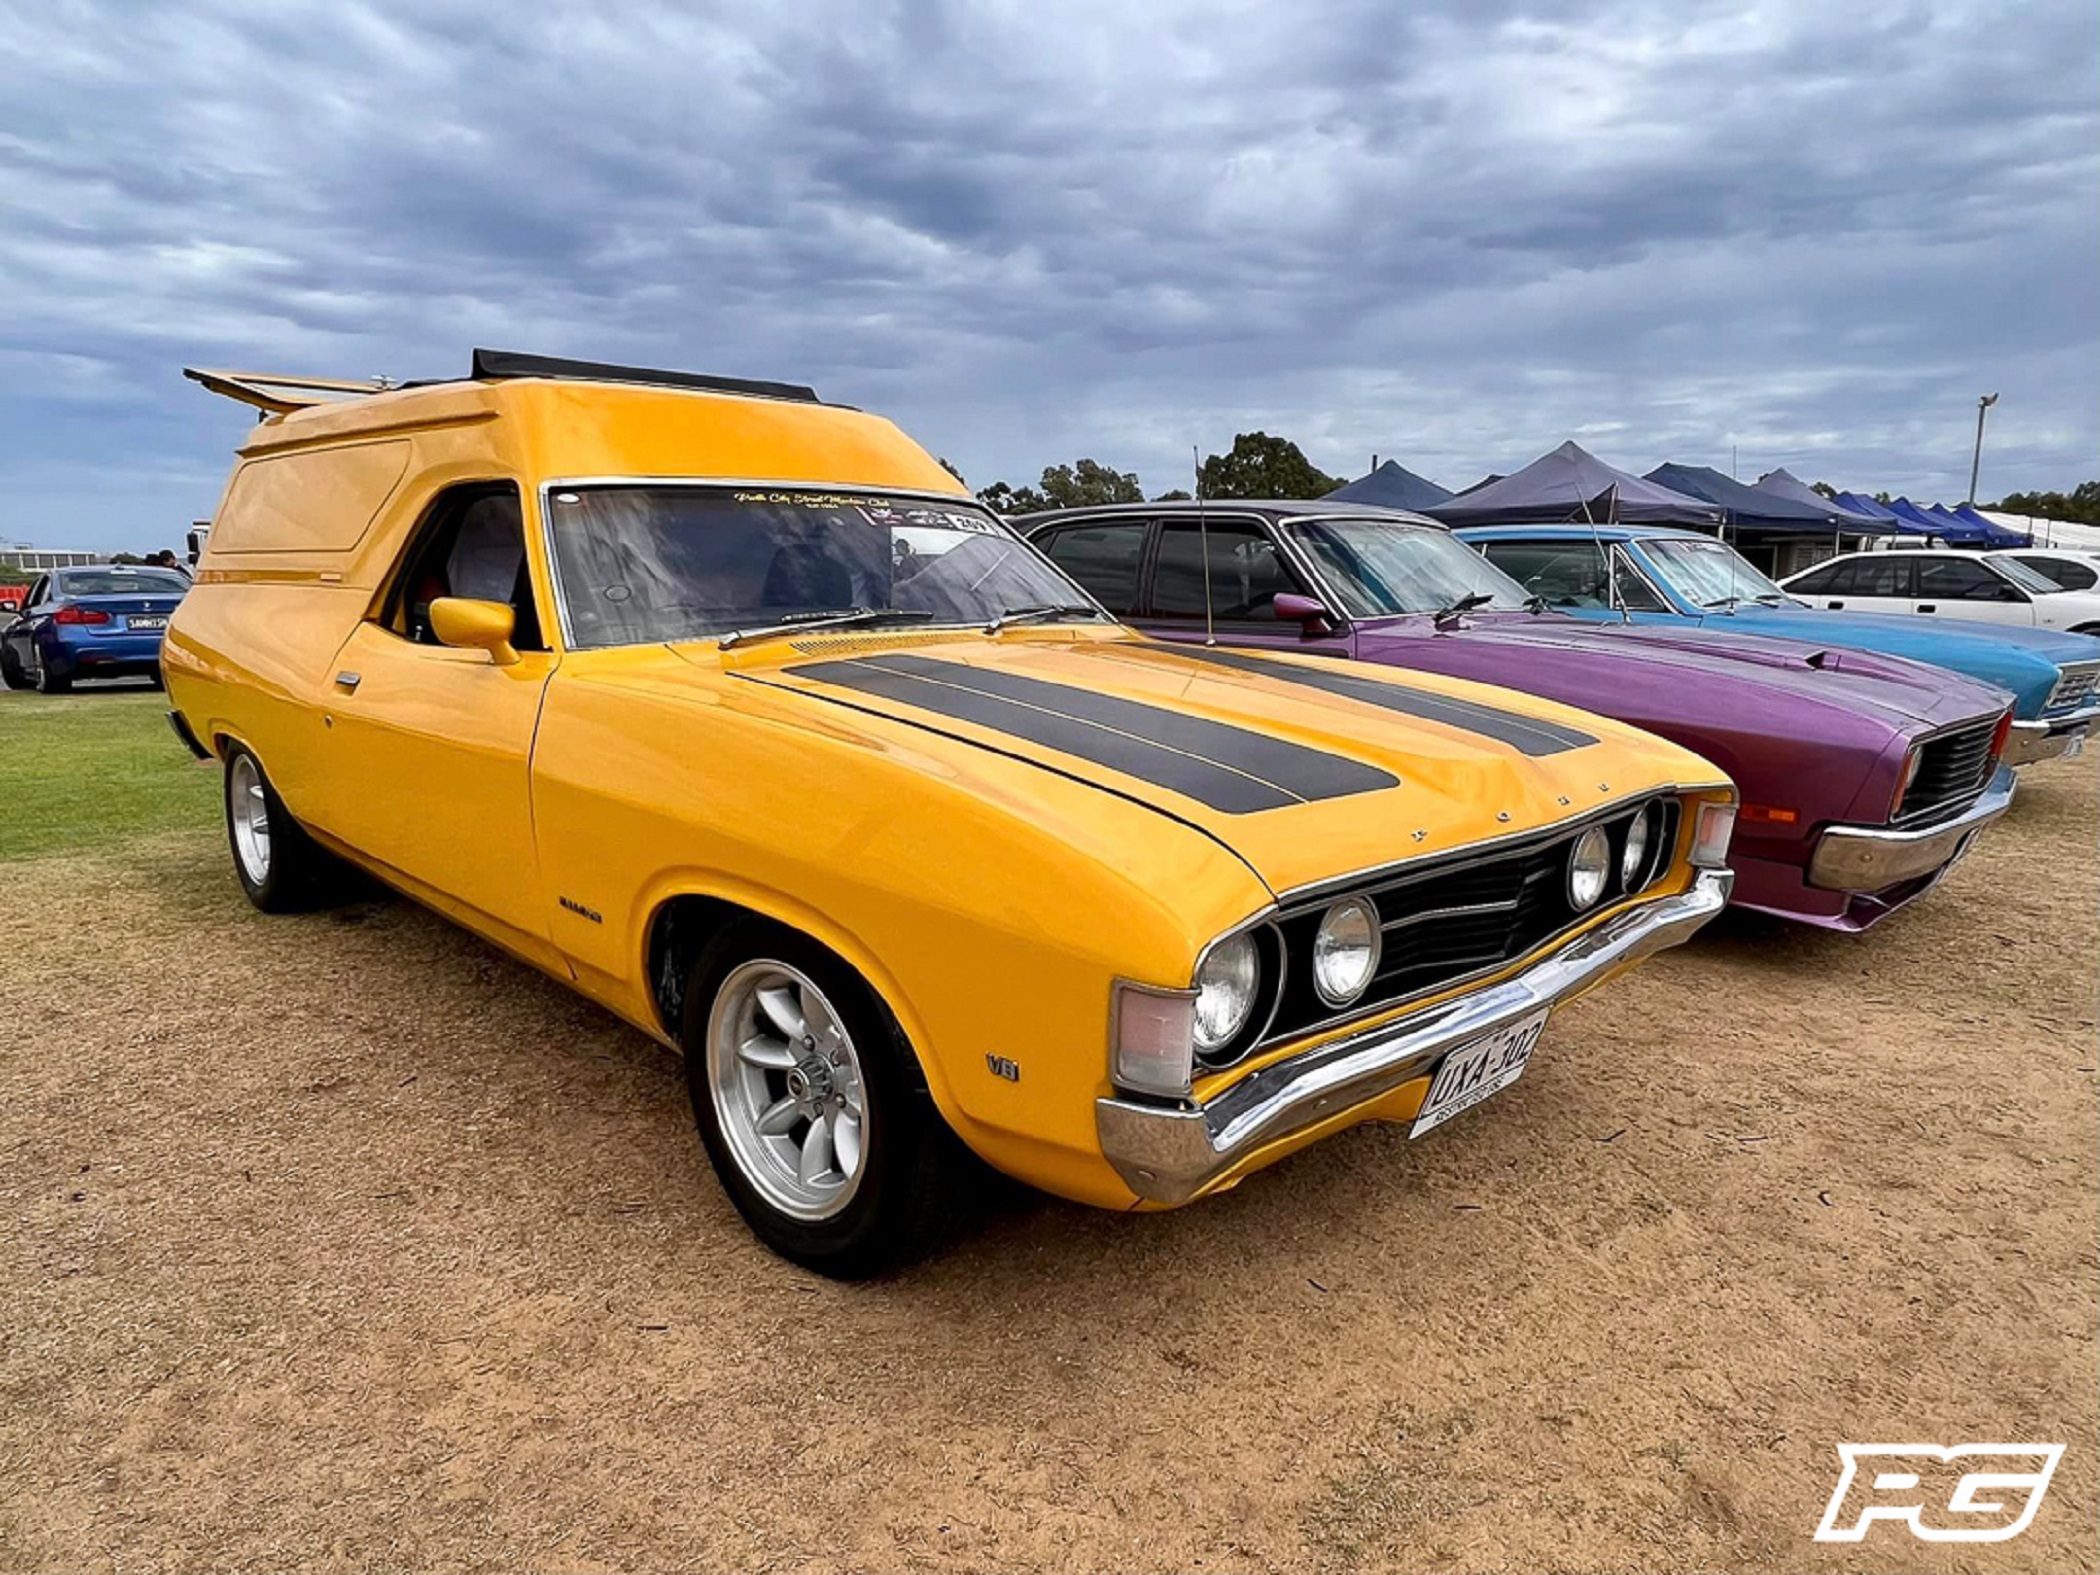 Video: Perth City Street Machine Club at Motorvation 37